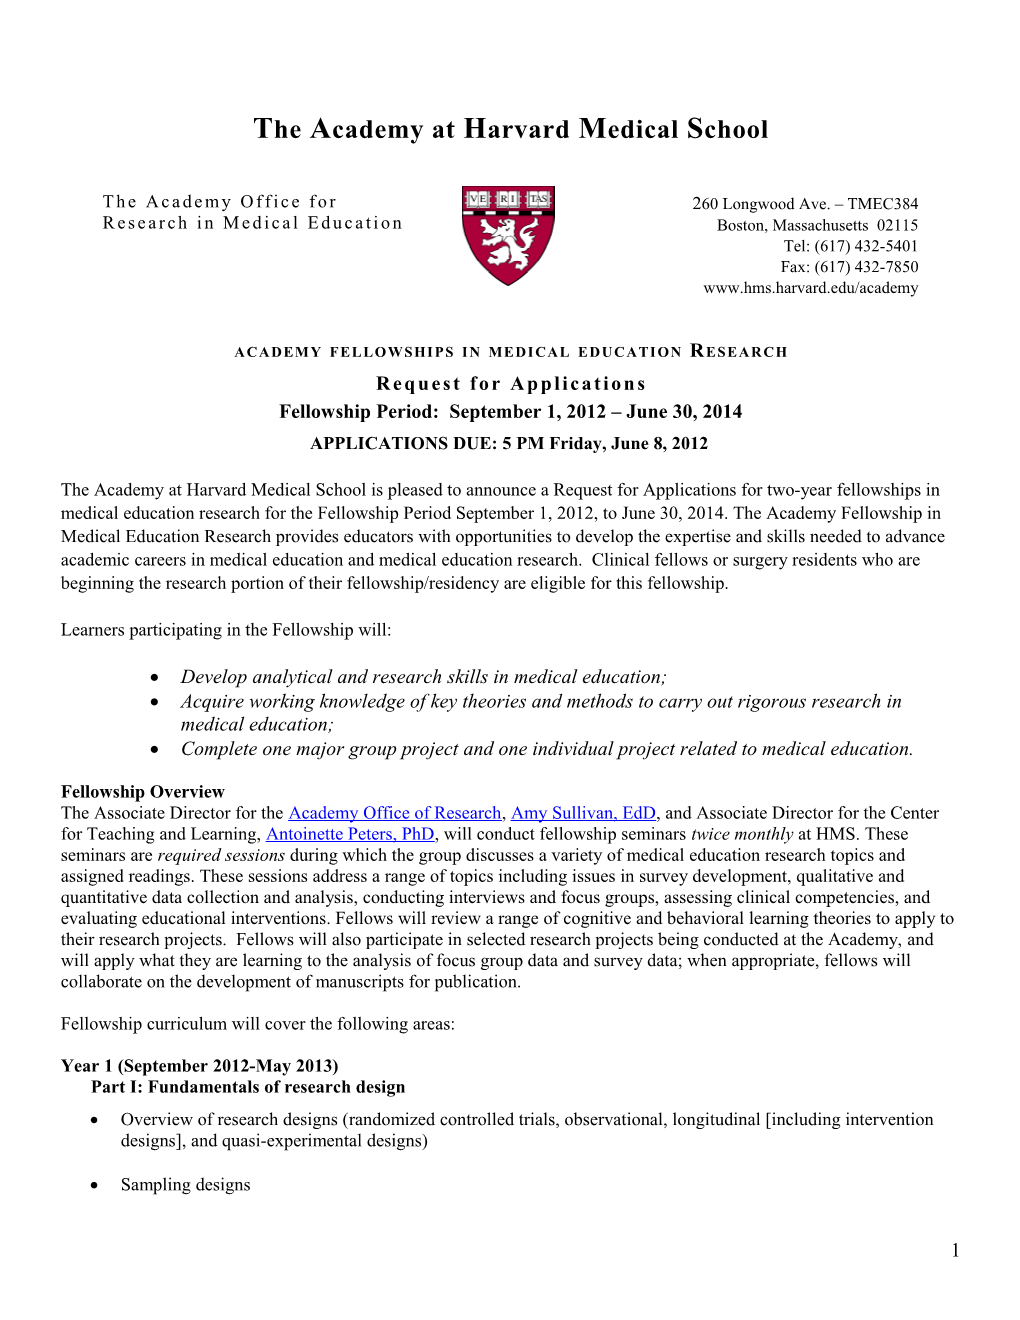 Academy Fellowships in Medical Education Research